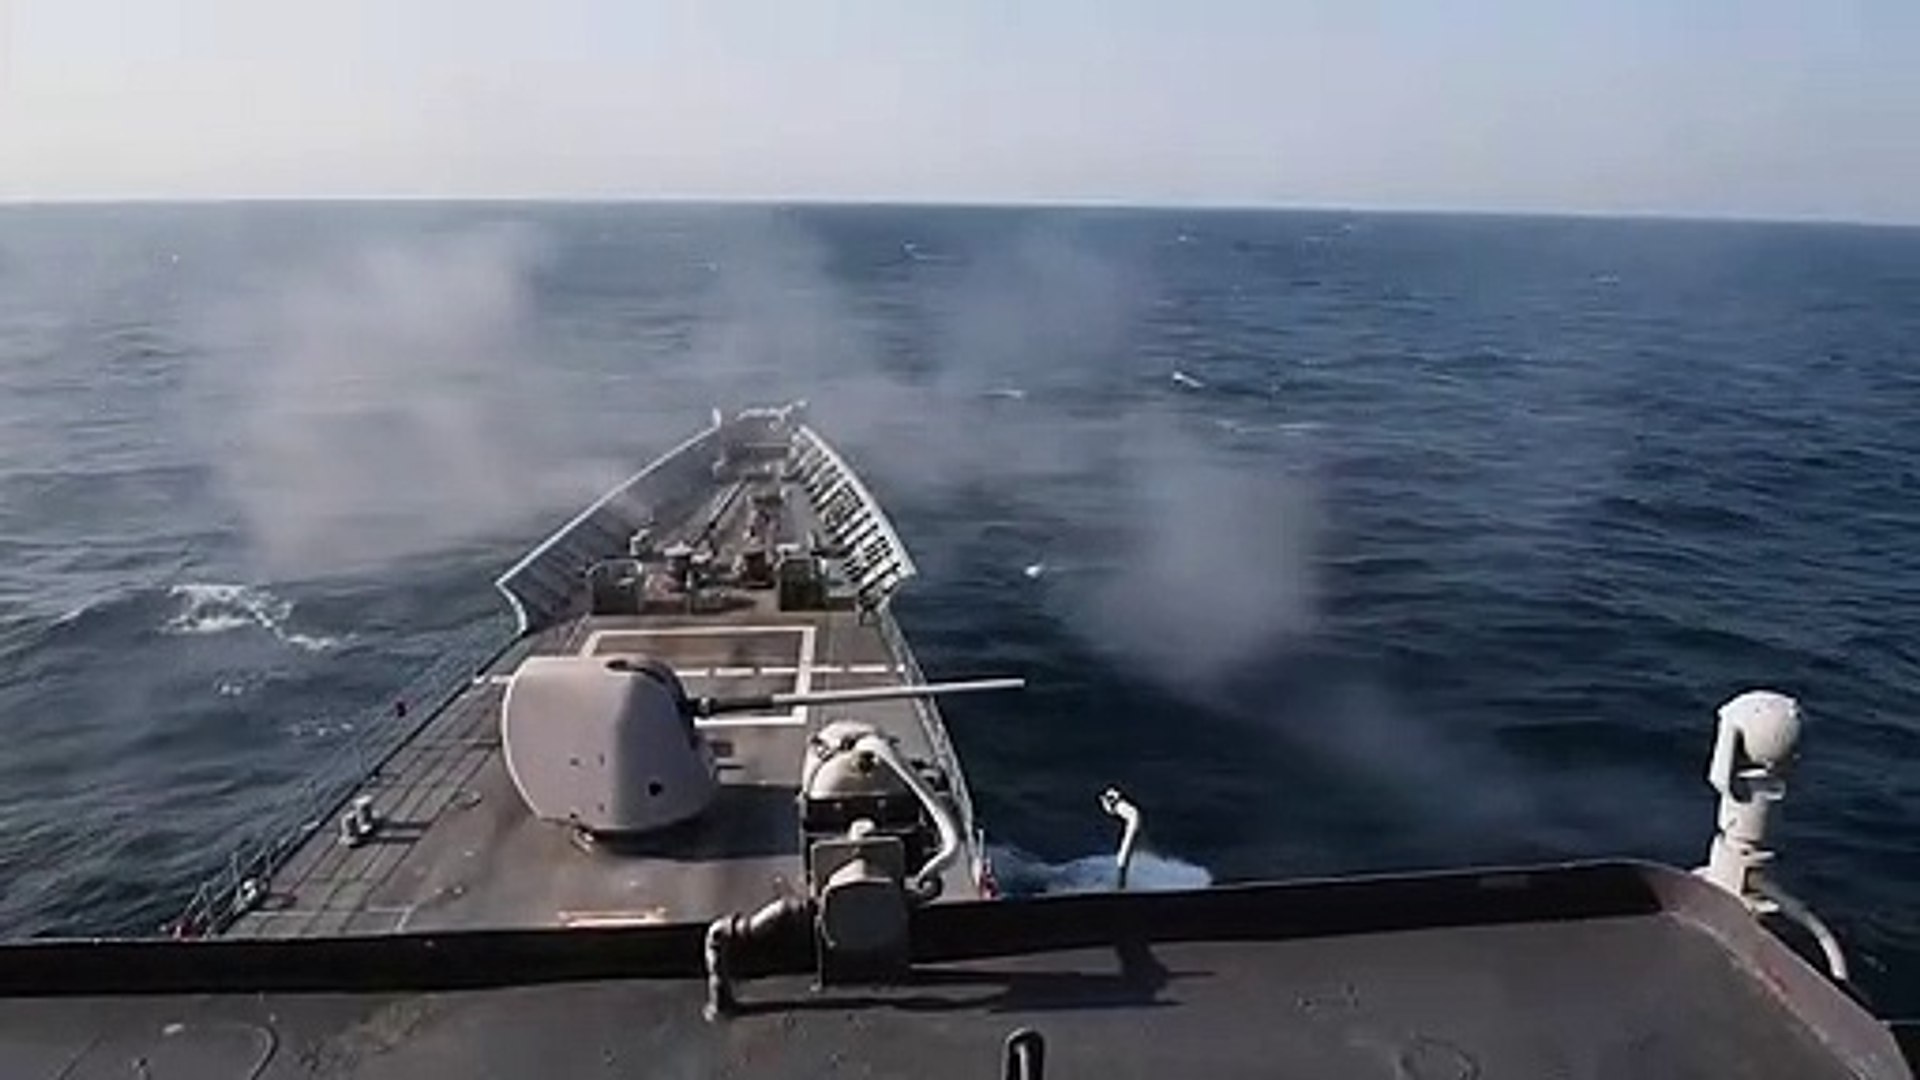 U.S Navy • Guided Missile Destroyer • Live Fire • Arabian Gulf